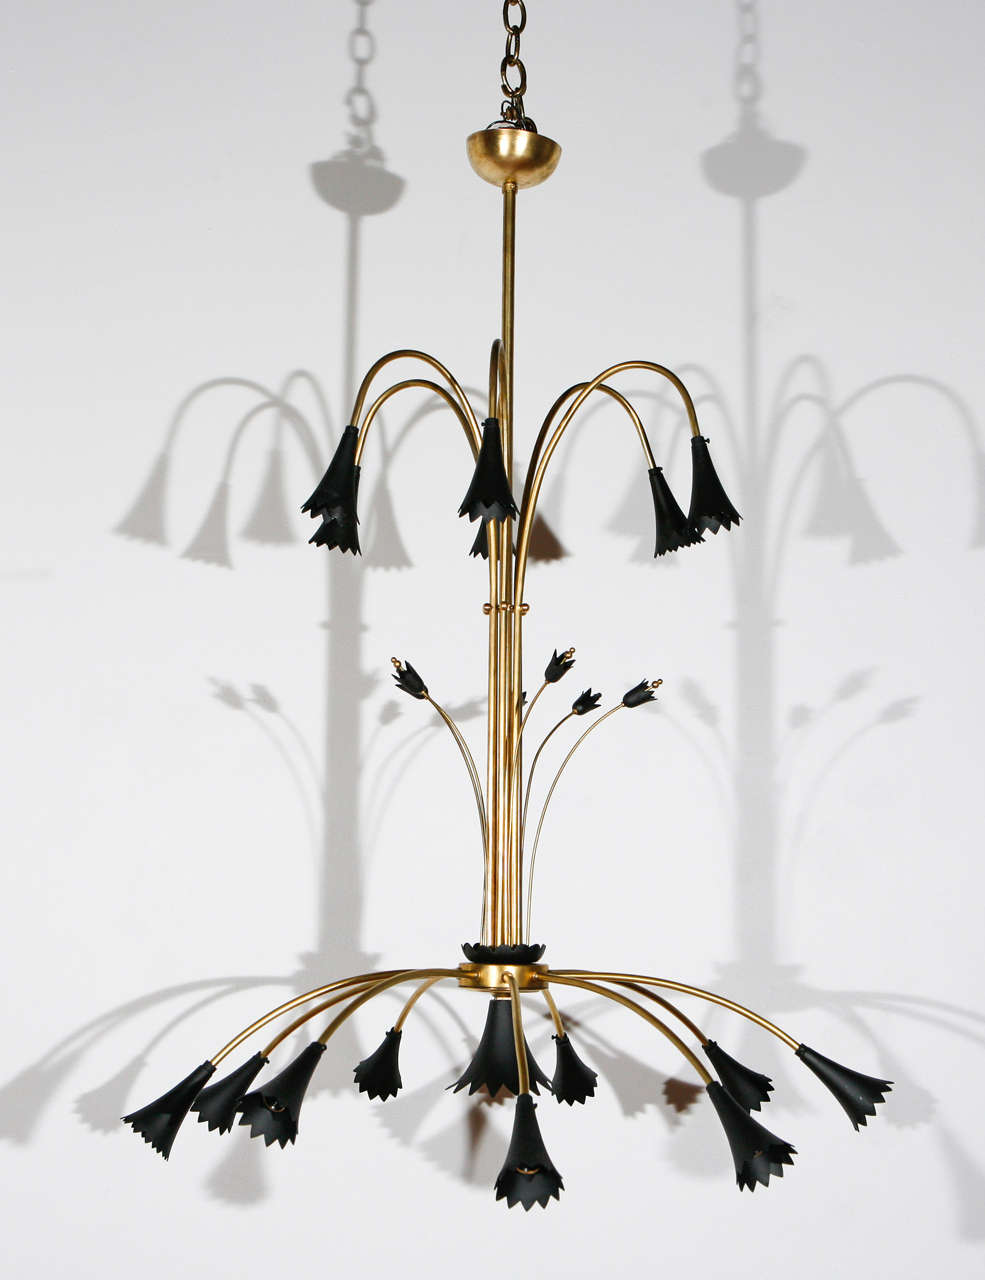 21 light fixture with candelabra sockets; black flowers have been repainted